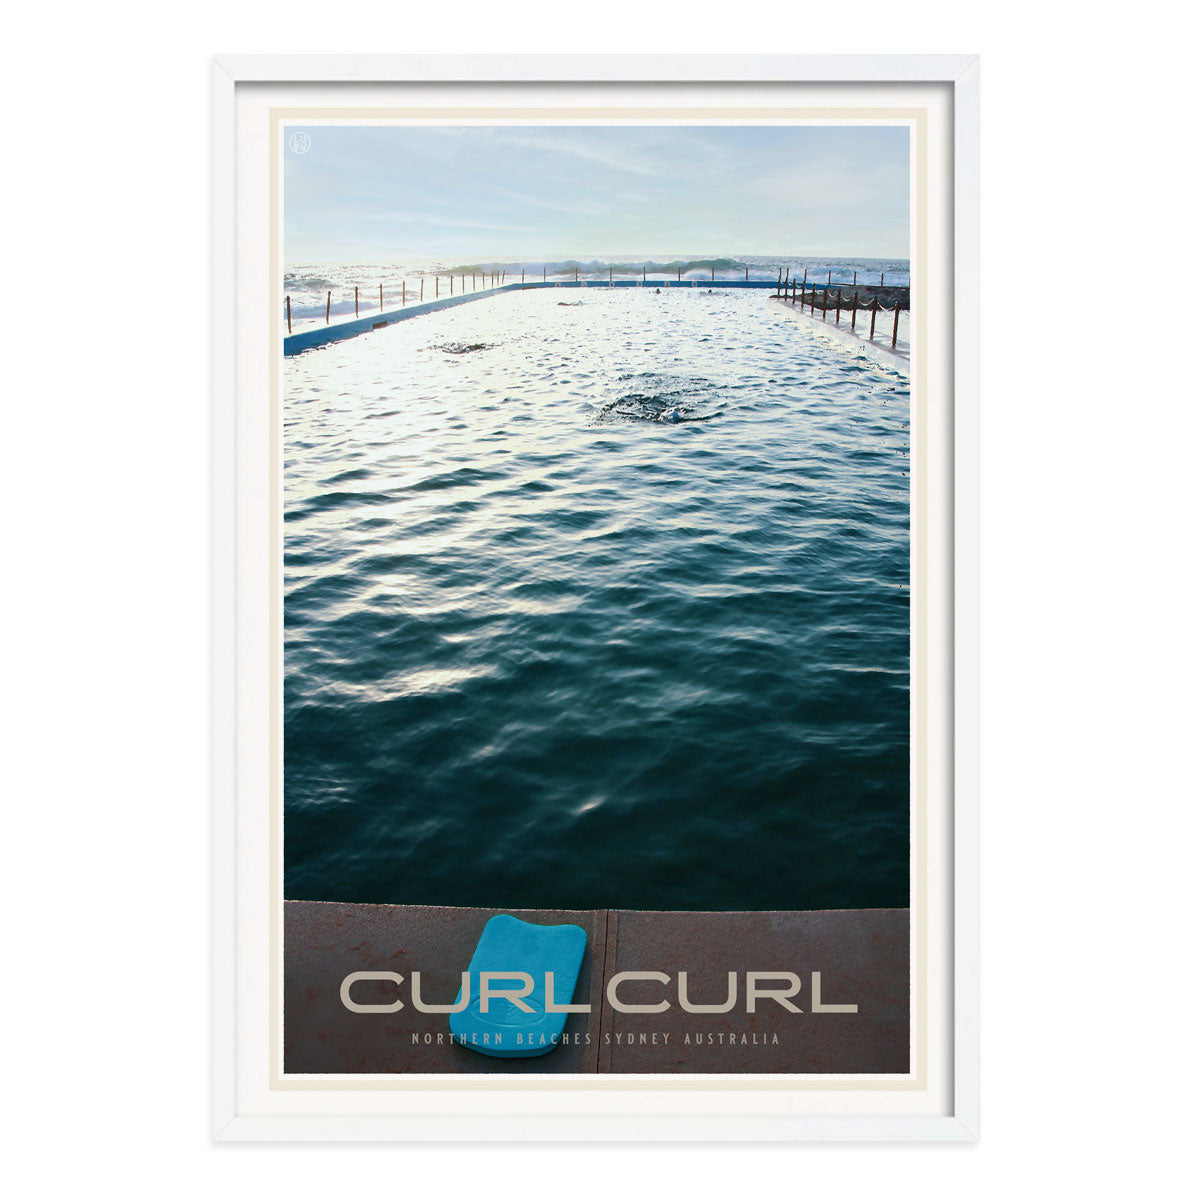 Curl curl pool retro vintage travel poster print in white frame from places we luv